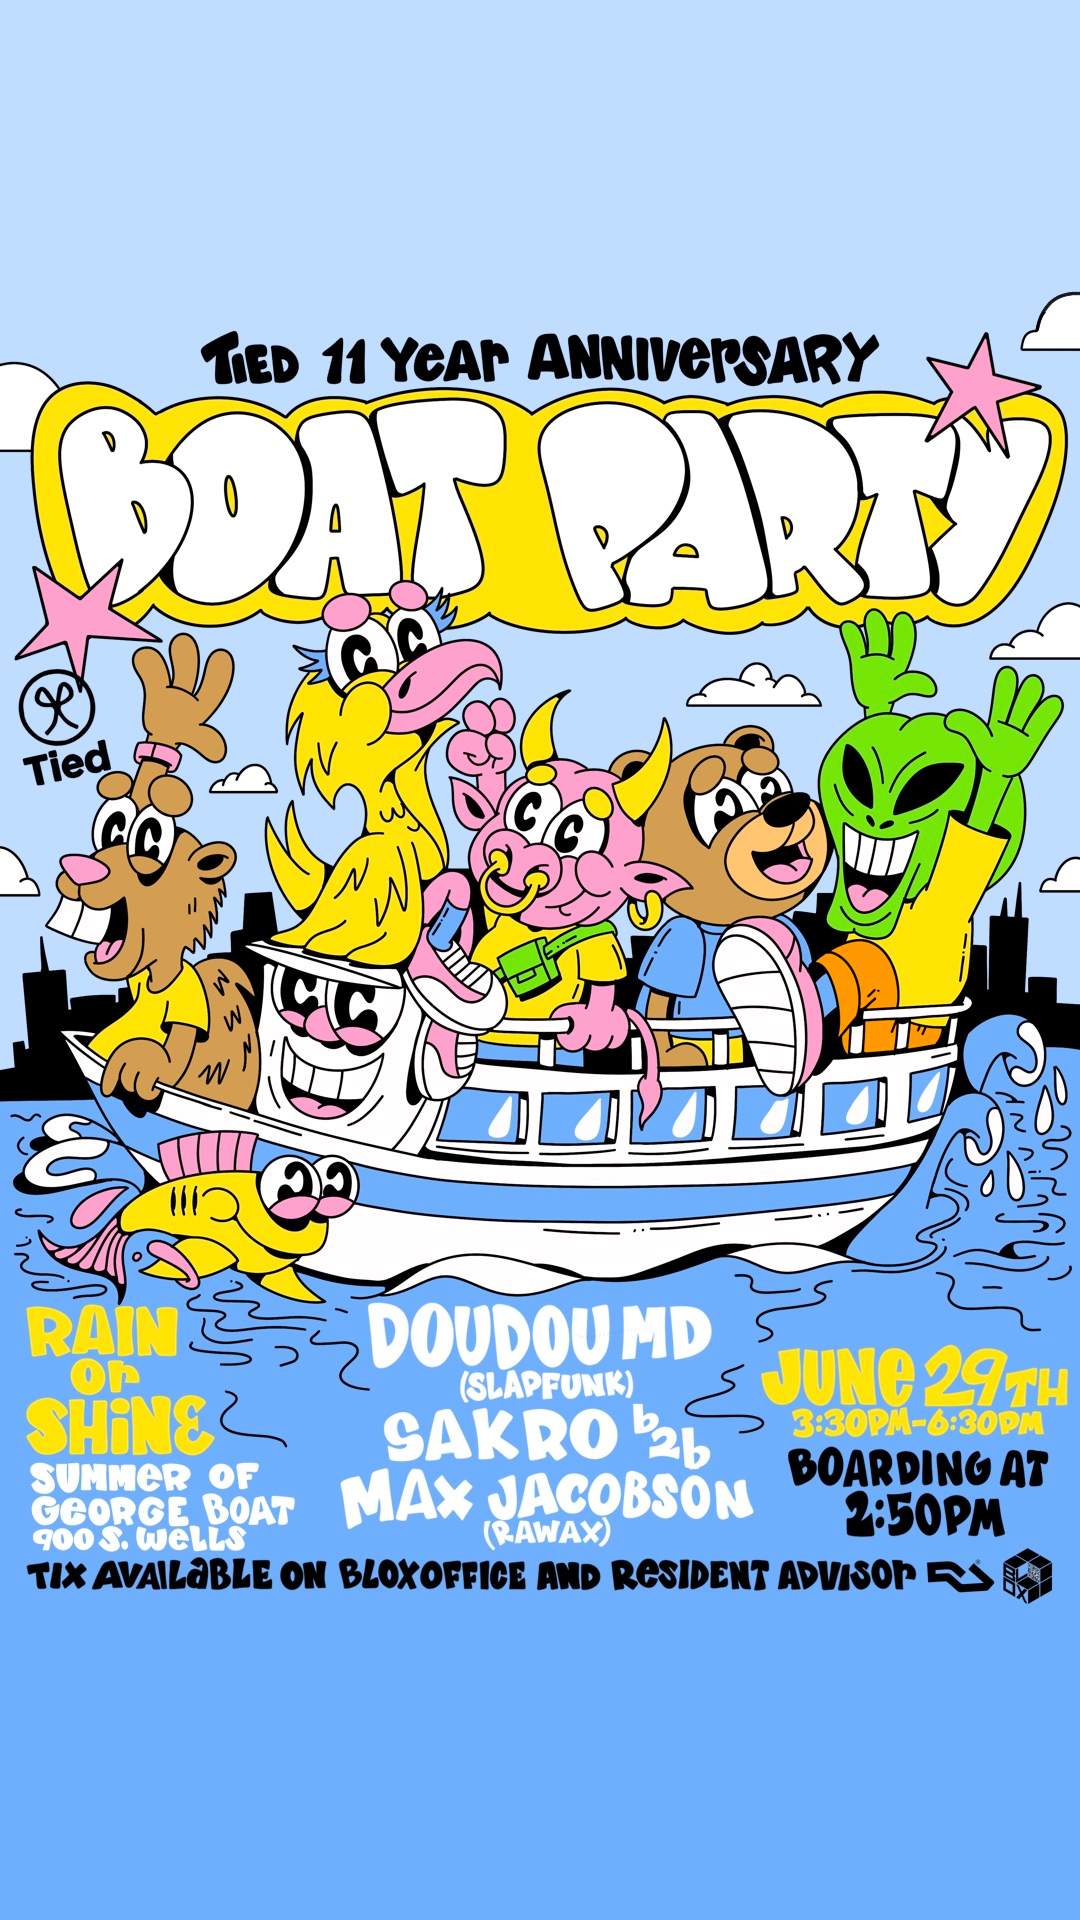 Tied 11 Year Anniversary Boat Party with Doudou MD, Sakro b2b Max Jacobson - フライヤー表